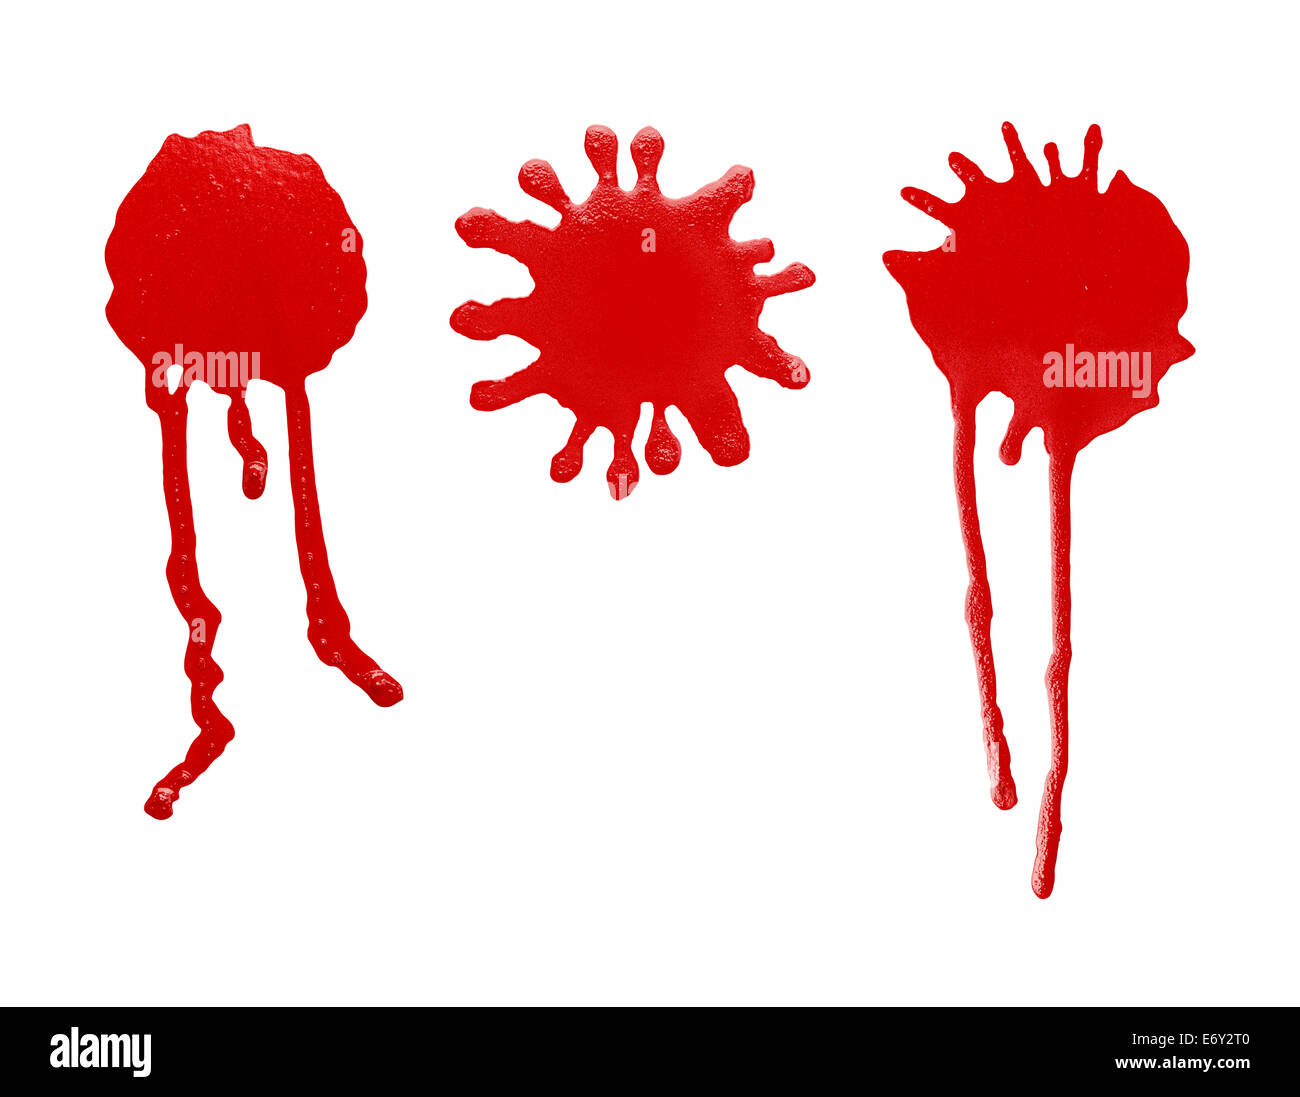 Red Spray Paint Blob Splatter Dripping Isolated on White Background. Stock Photo